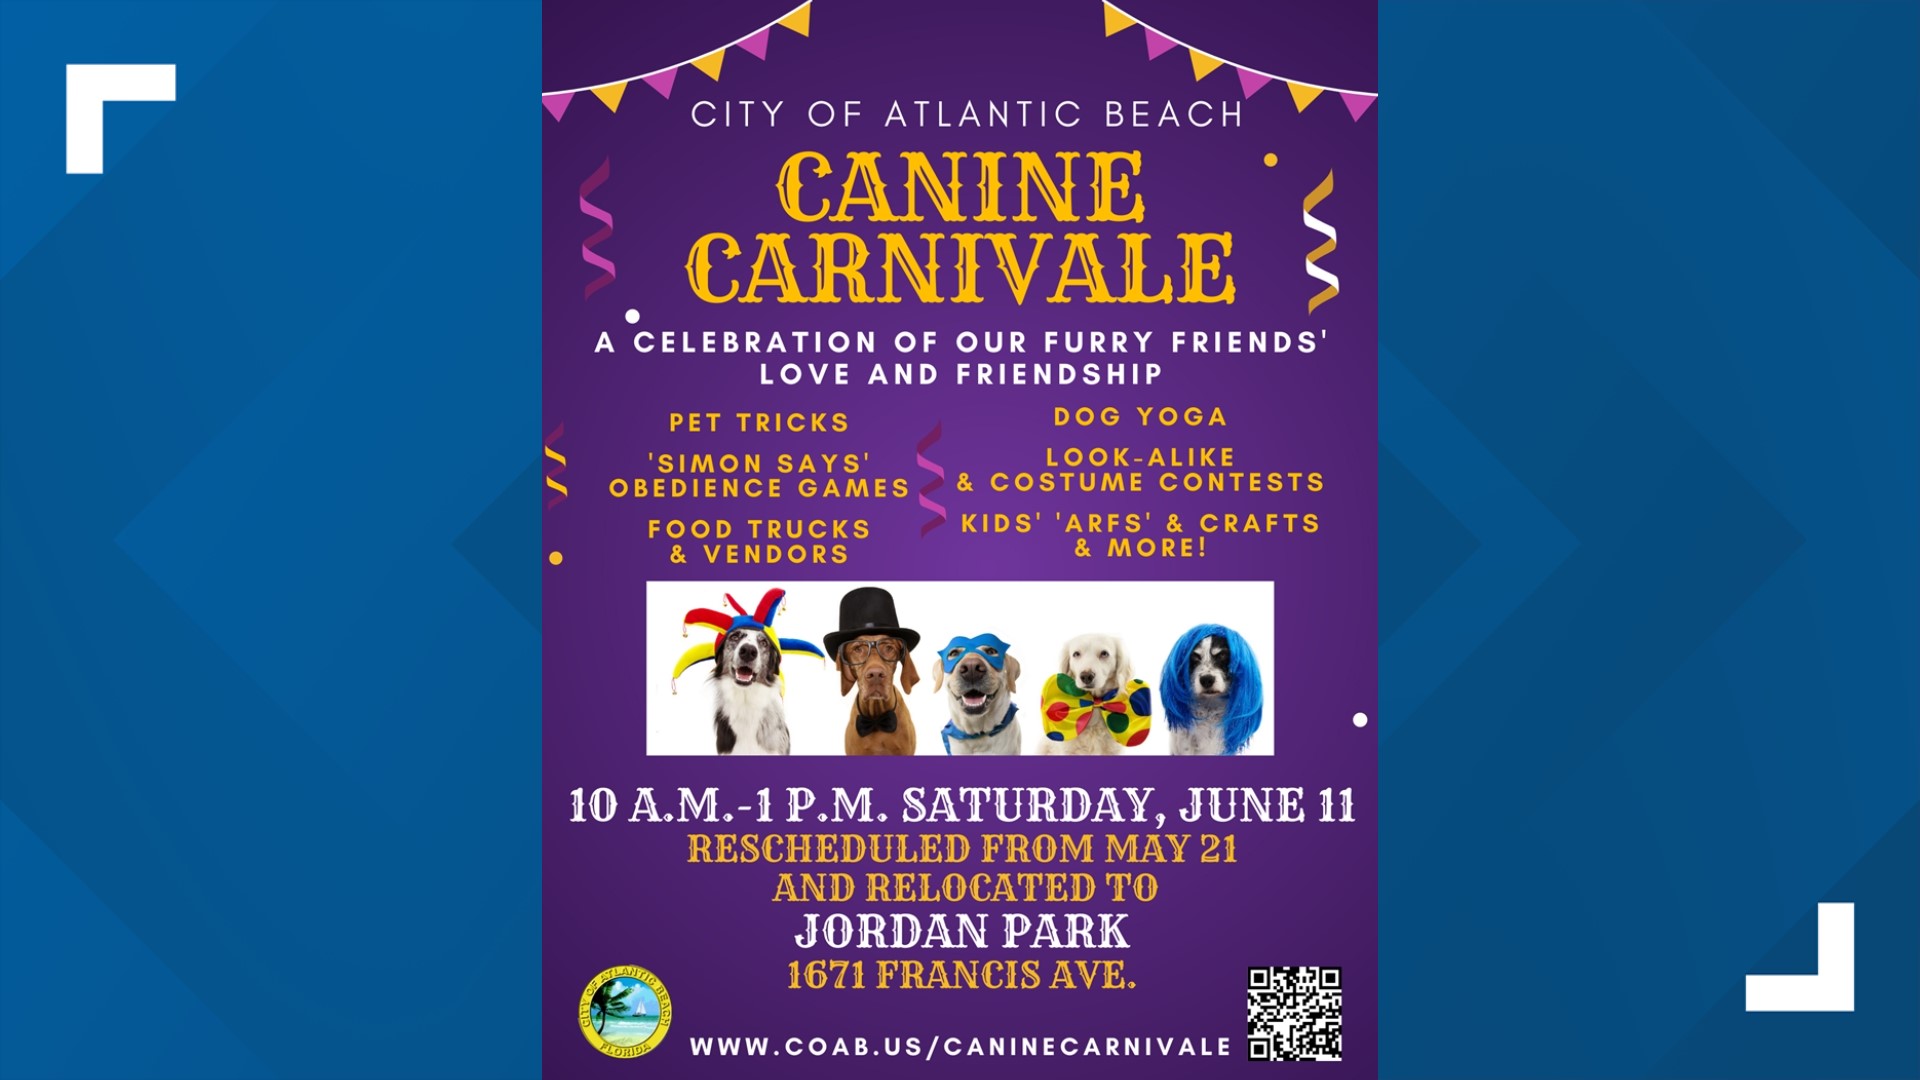 City of Atlantic Beach to hold inaugural Canine Carnivale